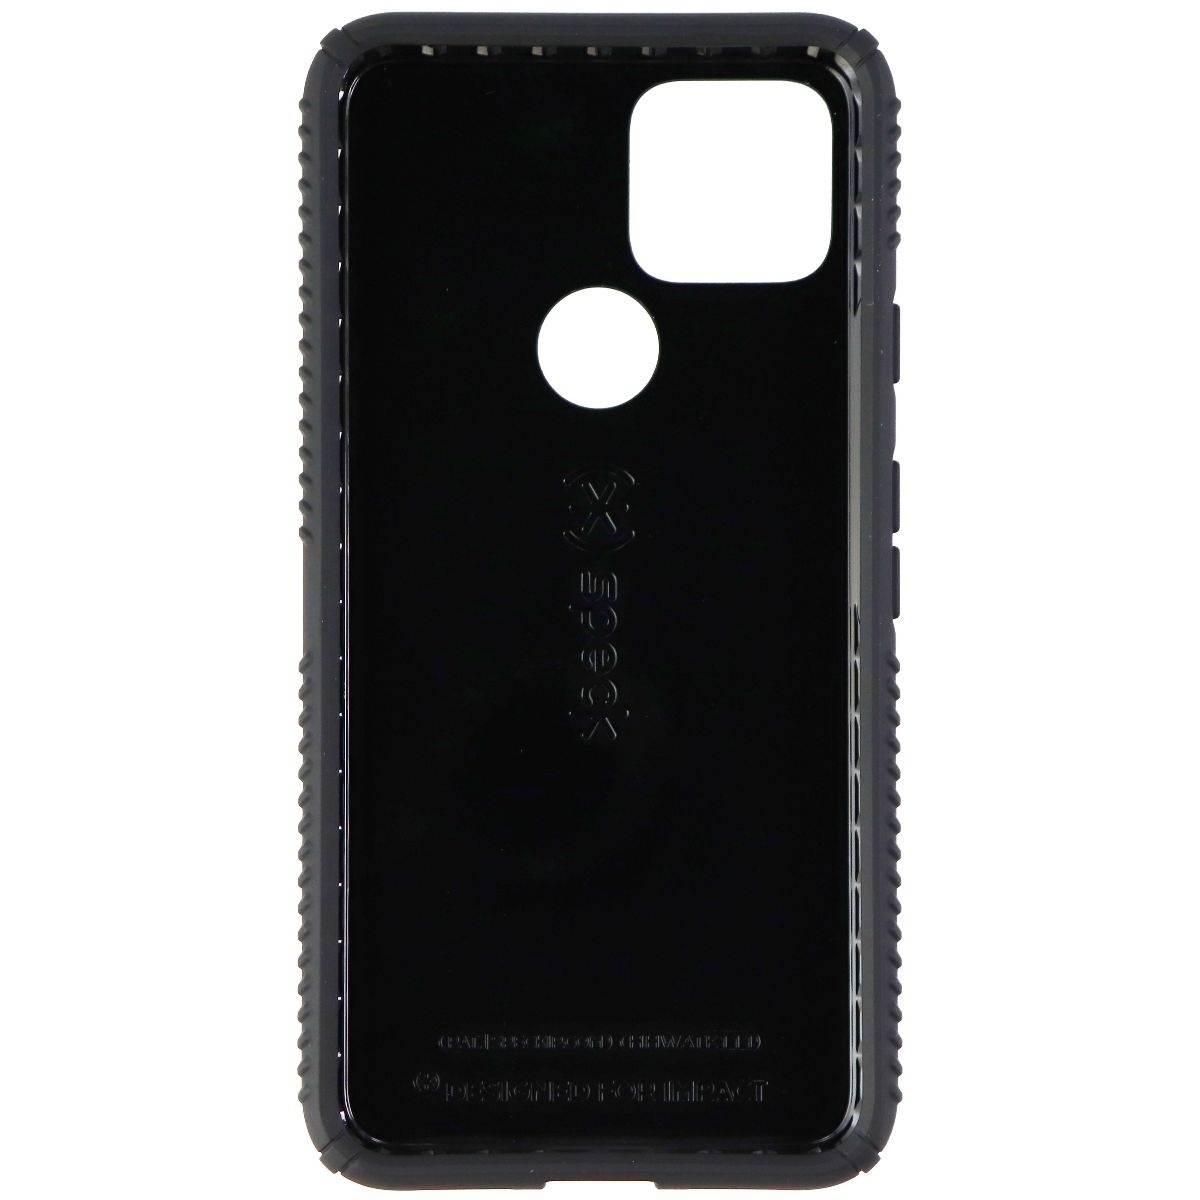 Speck Presidio Exotech Series Case With Grips For Google Pixel 5 - Black